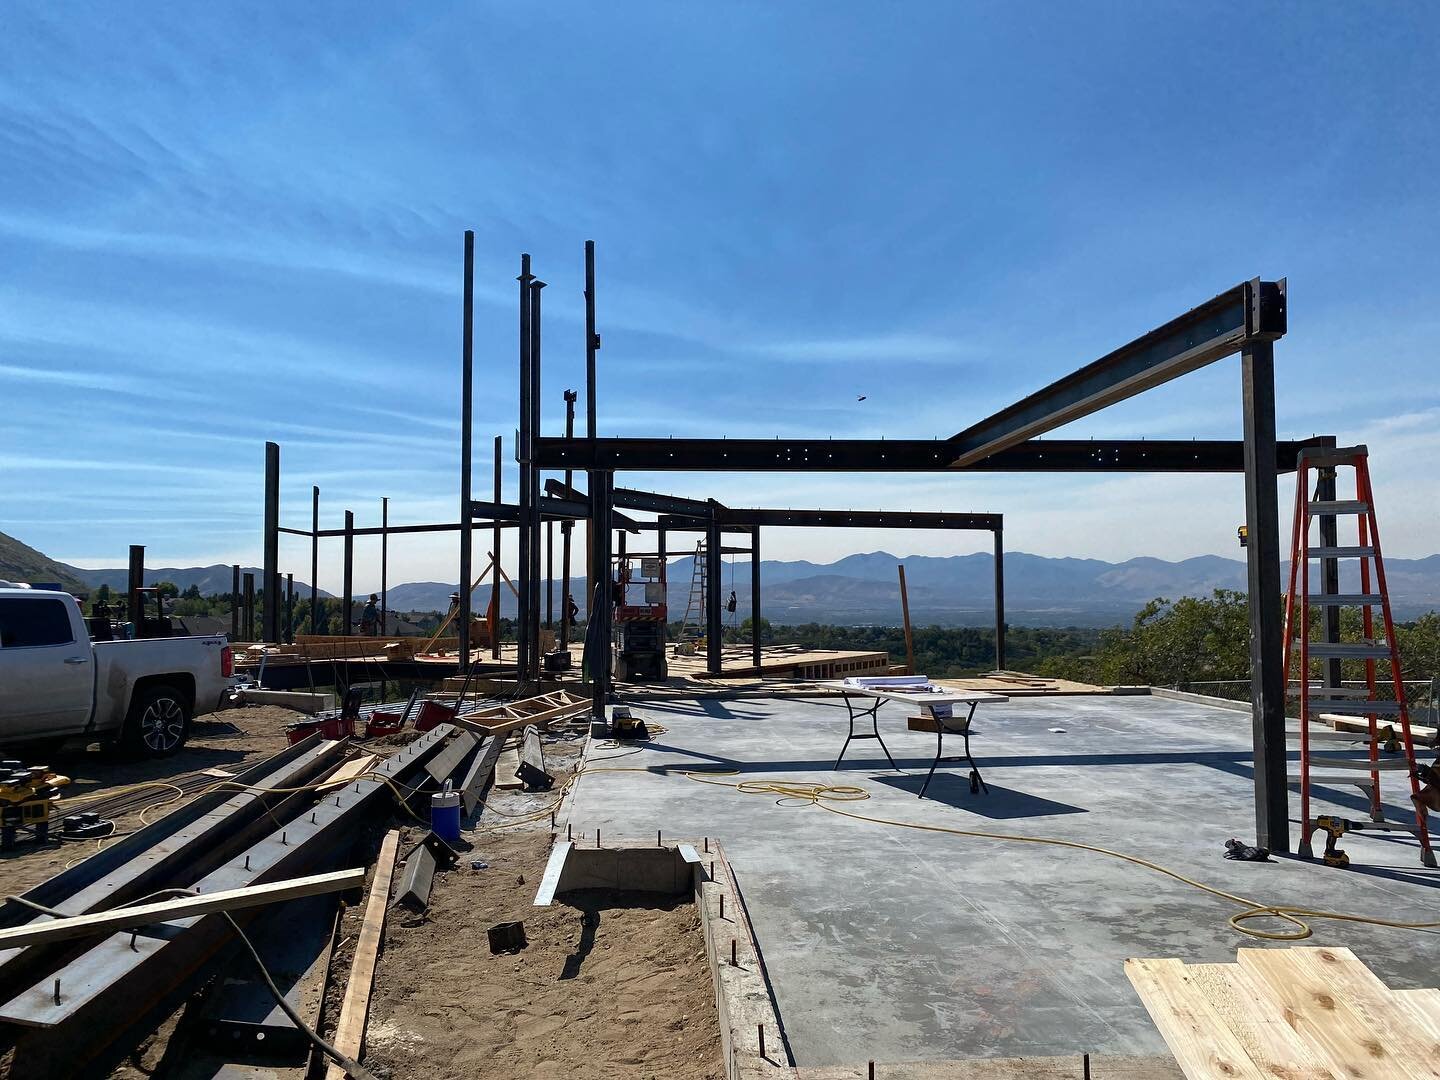 #upwalldesign home with 100+ tons of structural steel. Getting close to wrapping this structural package up with @robisonhomebuilders It&rsquo;s going to be stunning with views for days on the East bench of Sandy. 😍